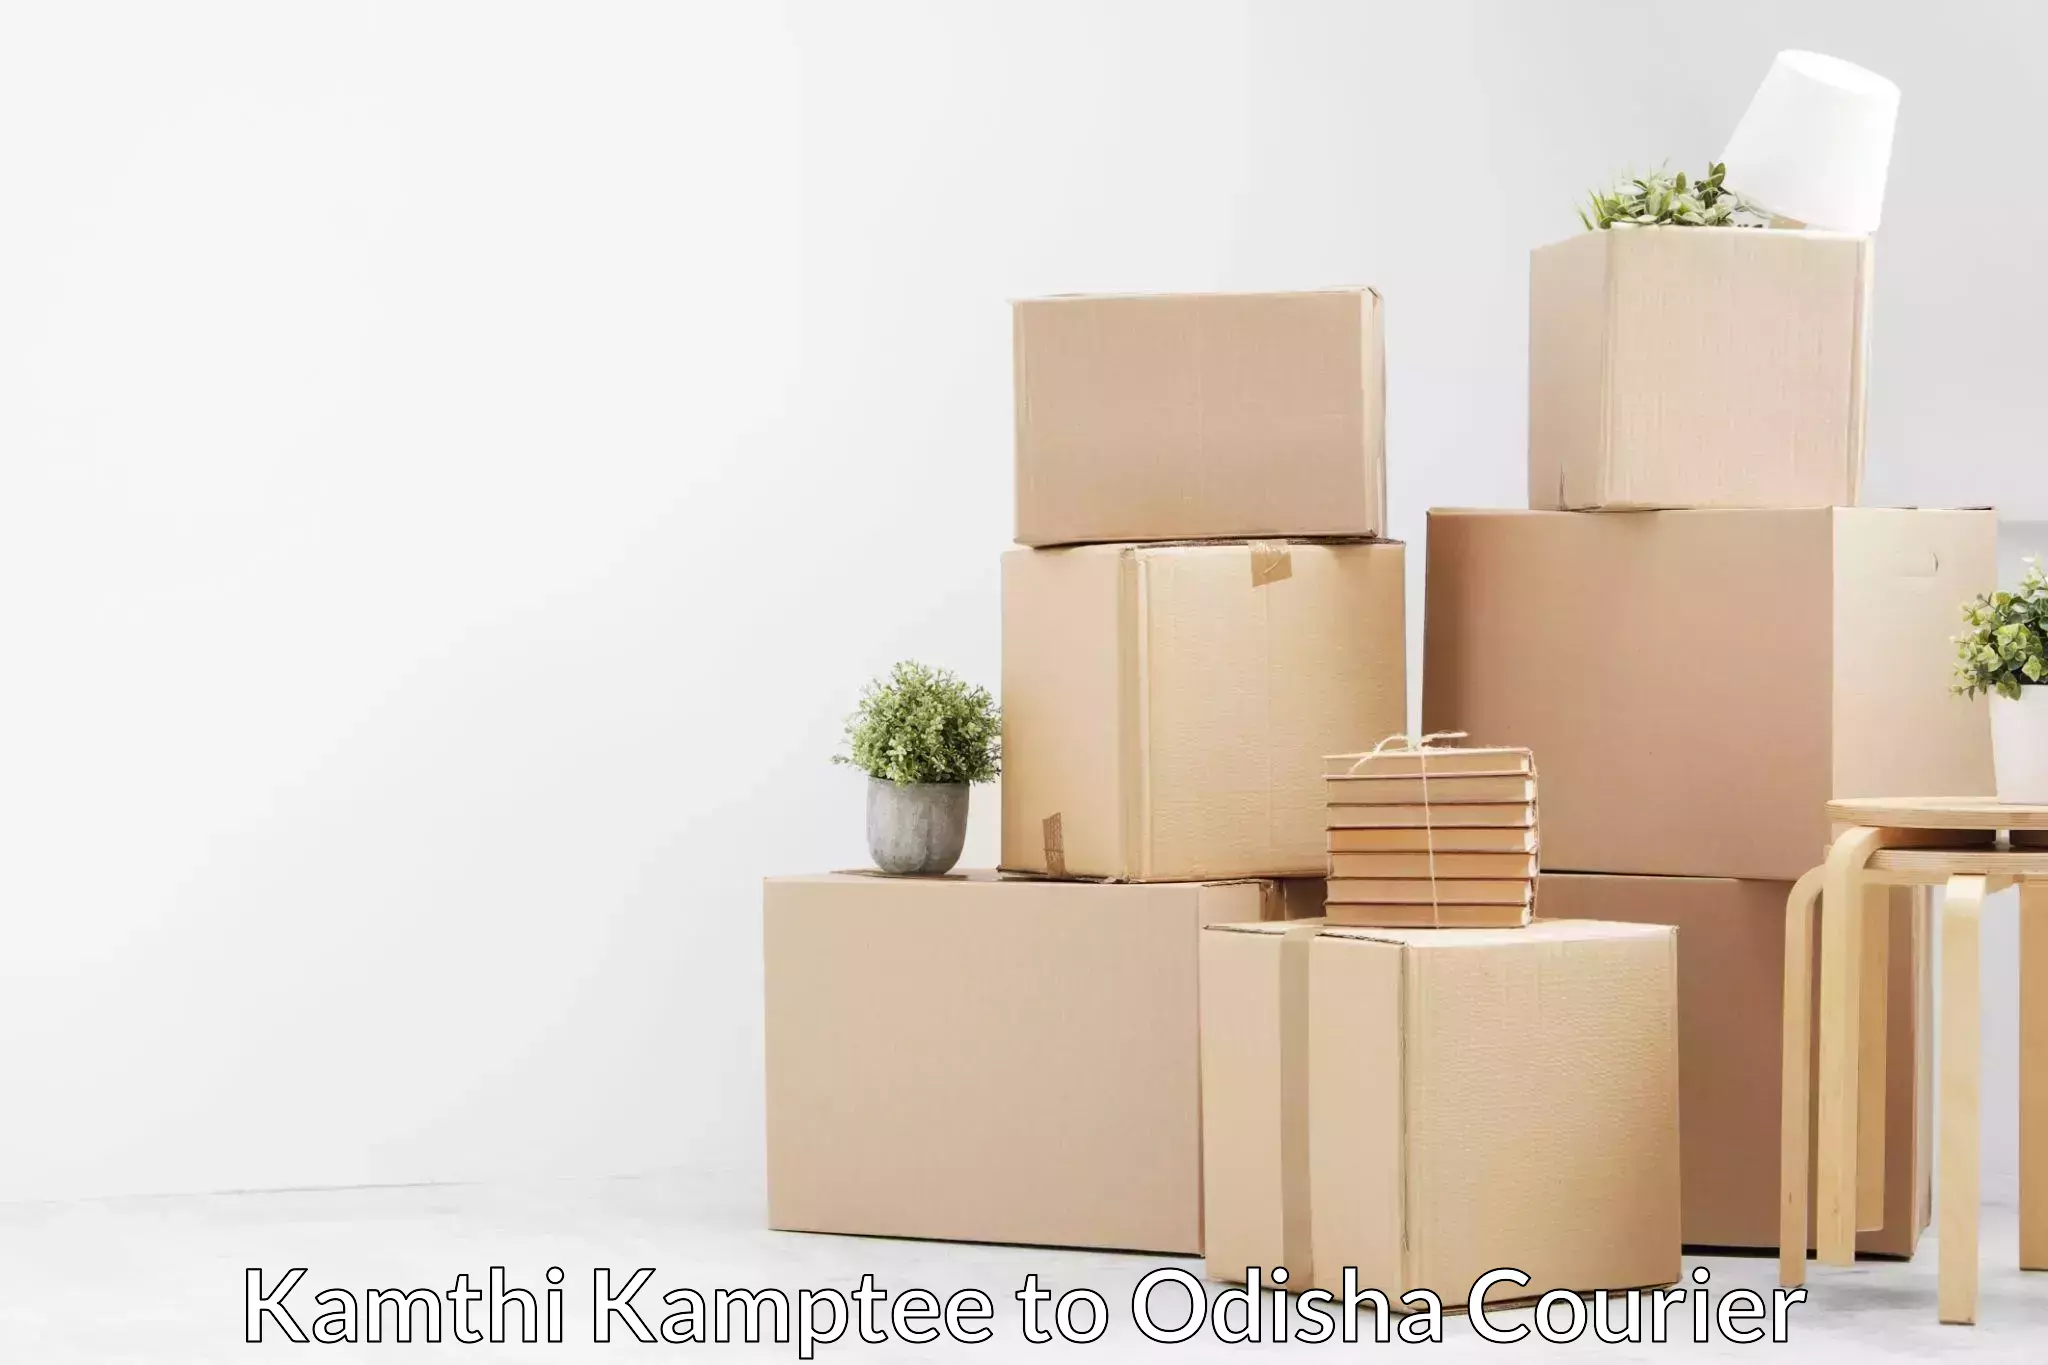 Professional moving assistance Kamthi Kamptee to Behrampur